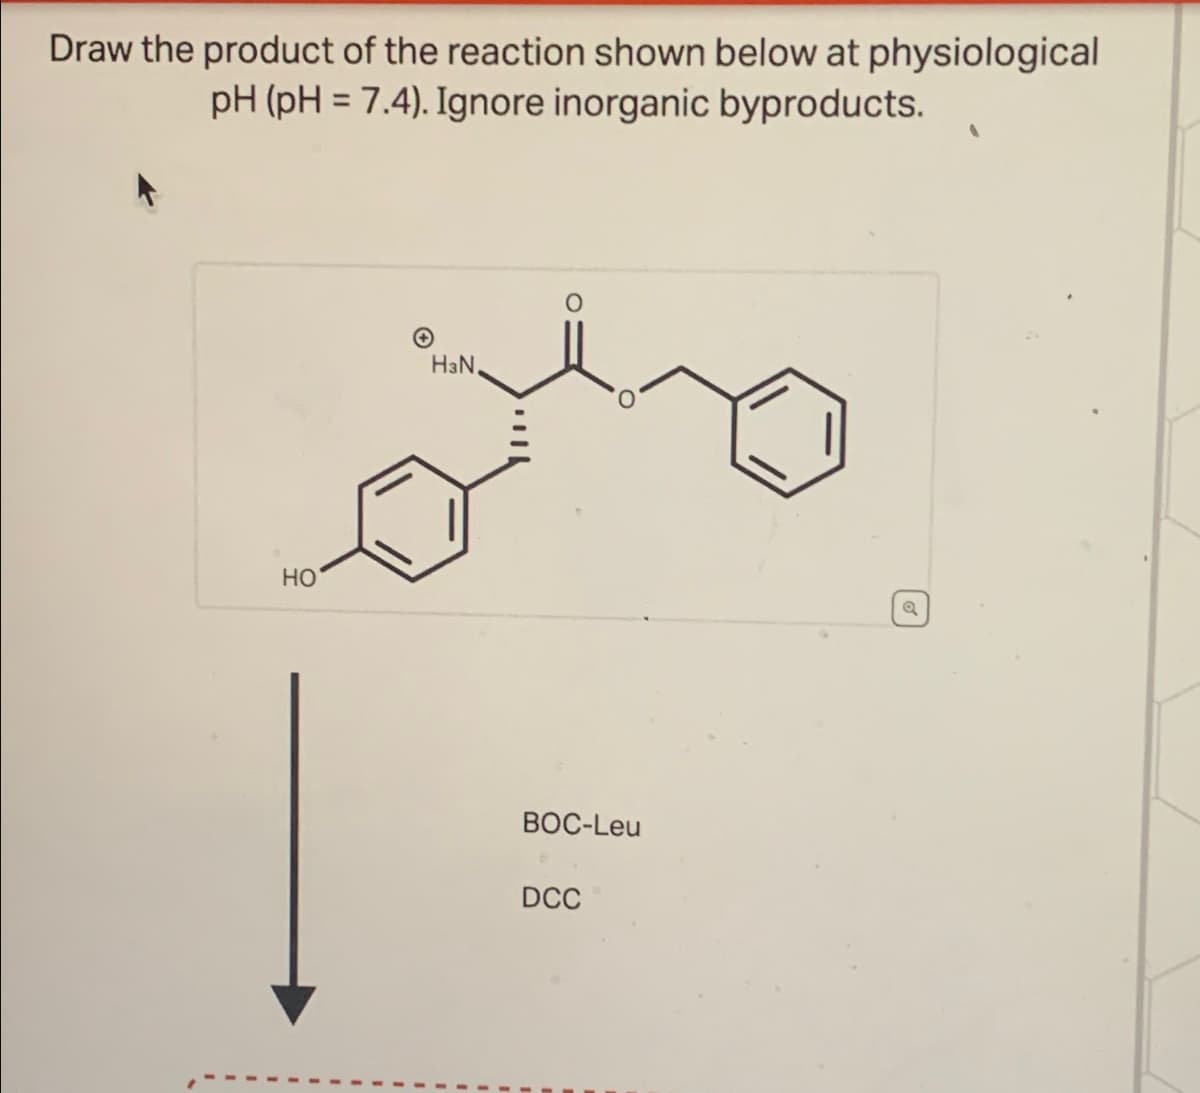 Draw the product of the reaction shown below at physiological
pH (pH 7.4). Ignore inorganic byproducts.
HO
H3N,
BOC-Leu
DCC
a